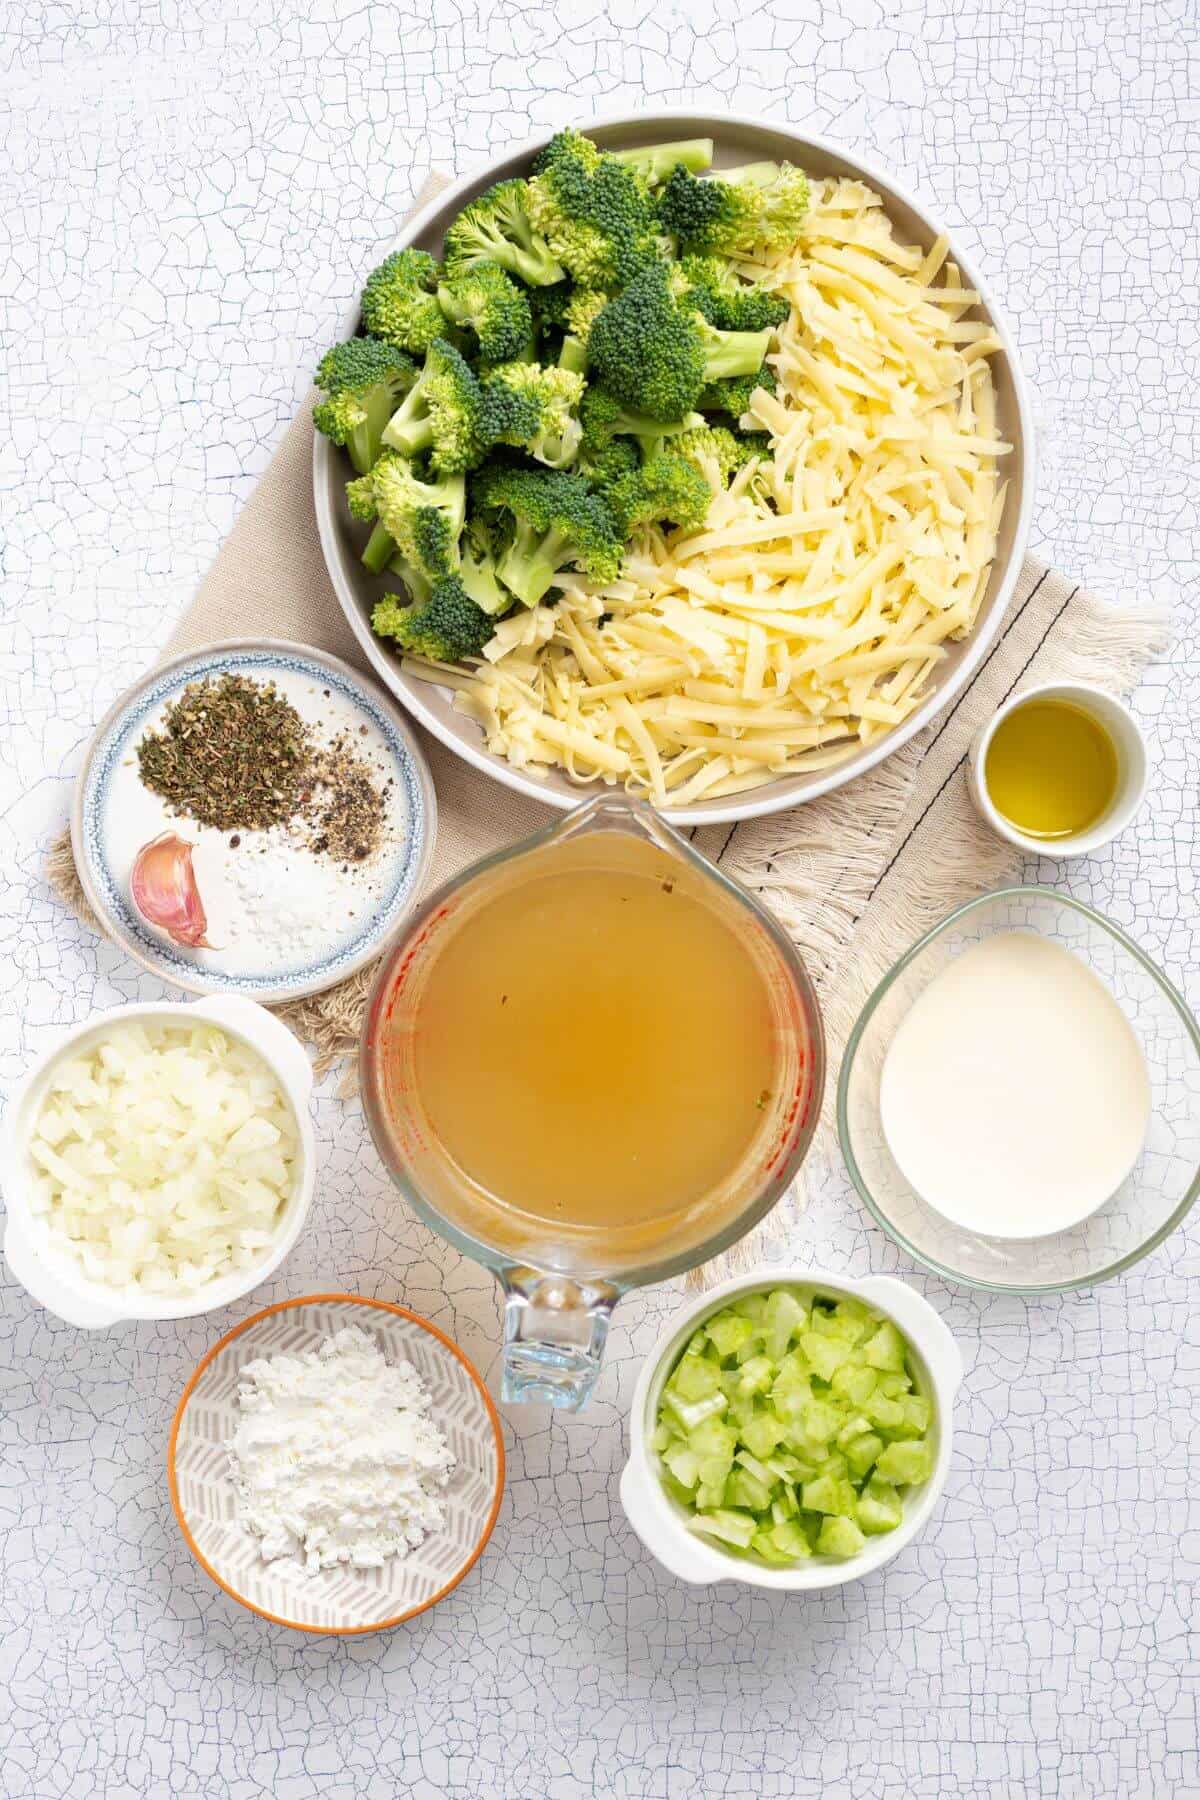 A bowl of broccoli, cheese, and other ingredients on a table.